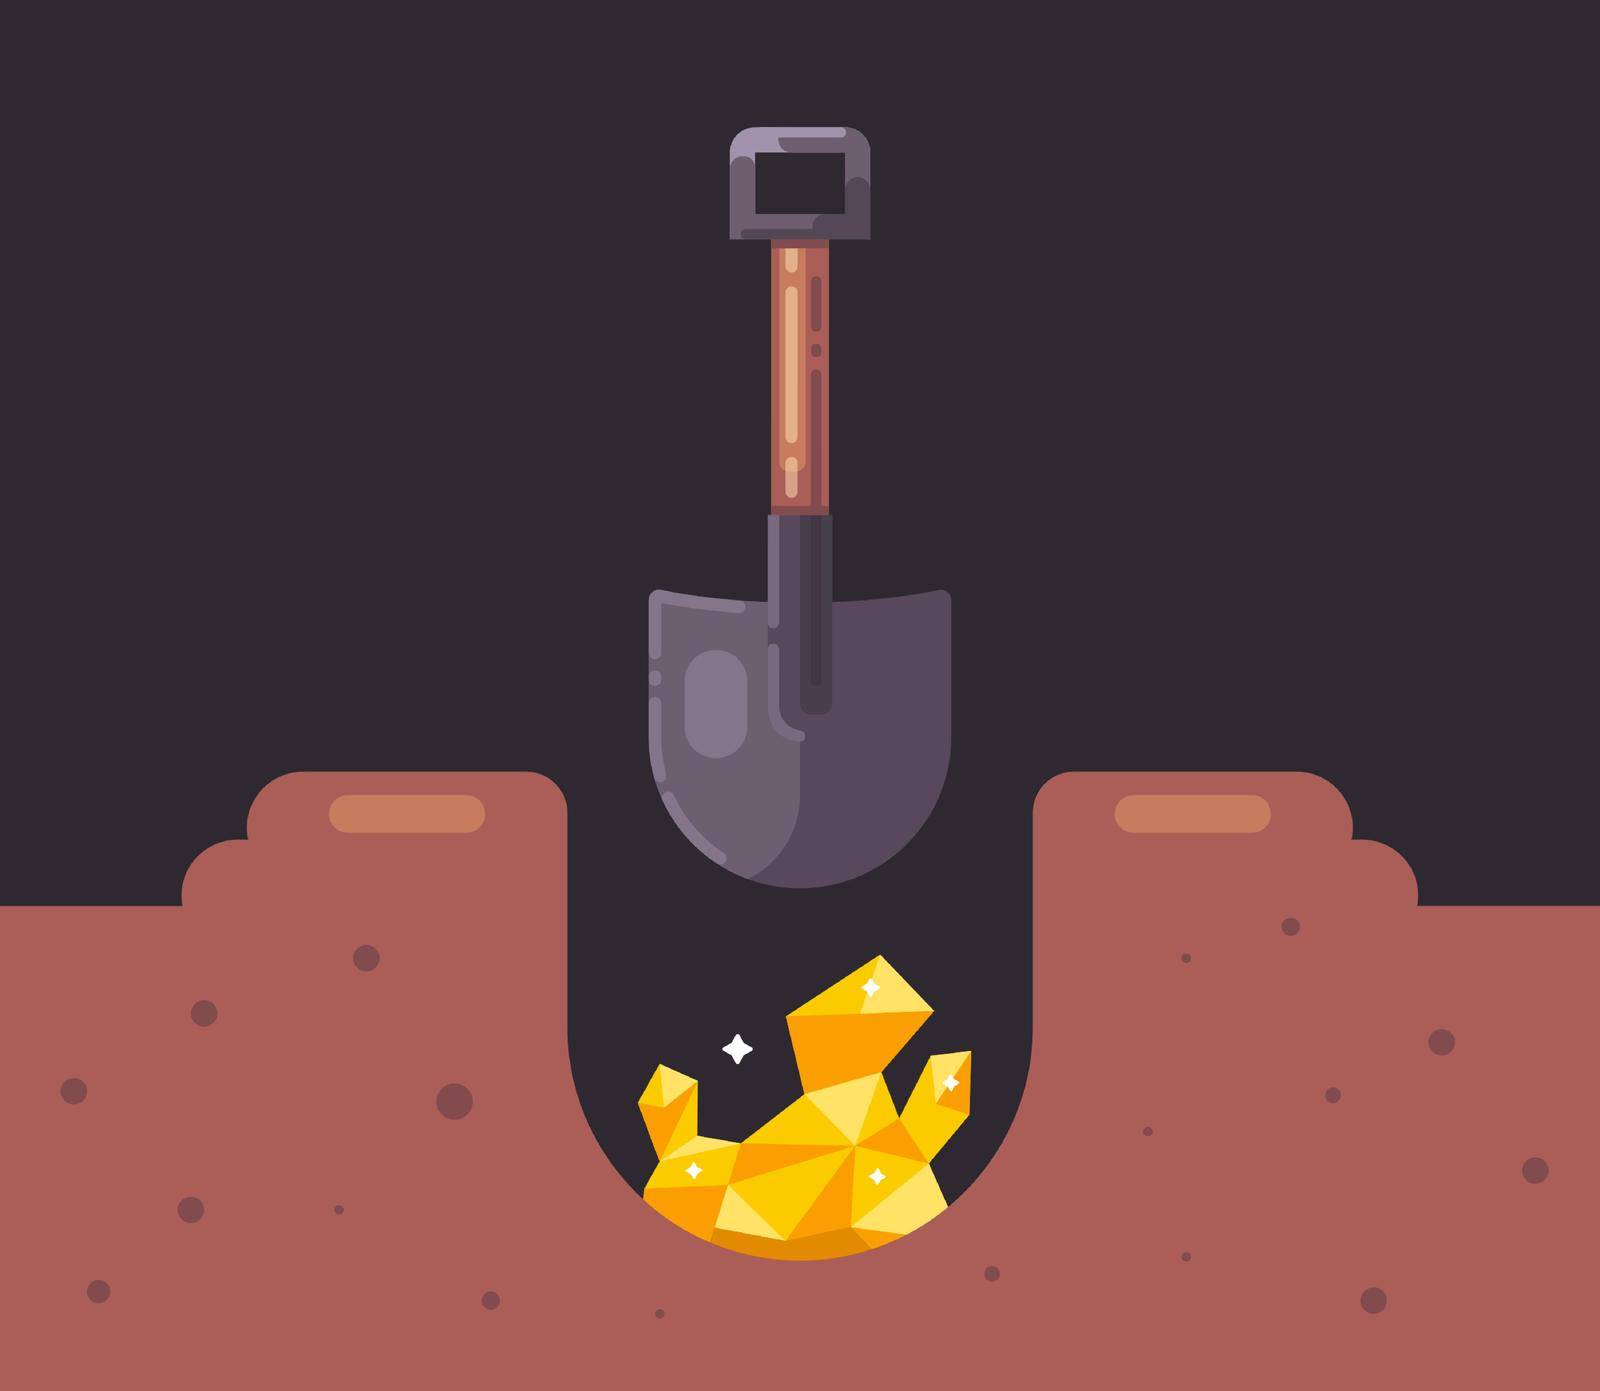 dig a hole with a shovel and find gold. treasure hunt in the earth. by PlutusART